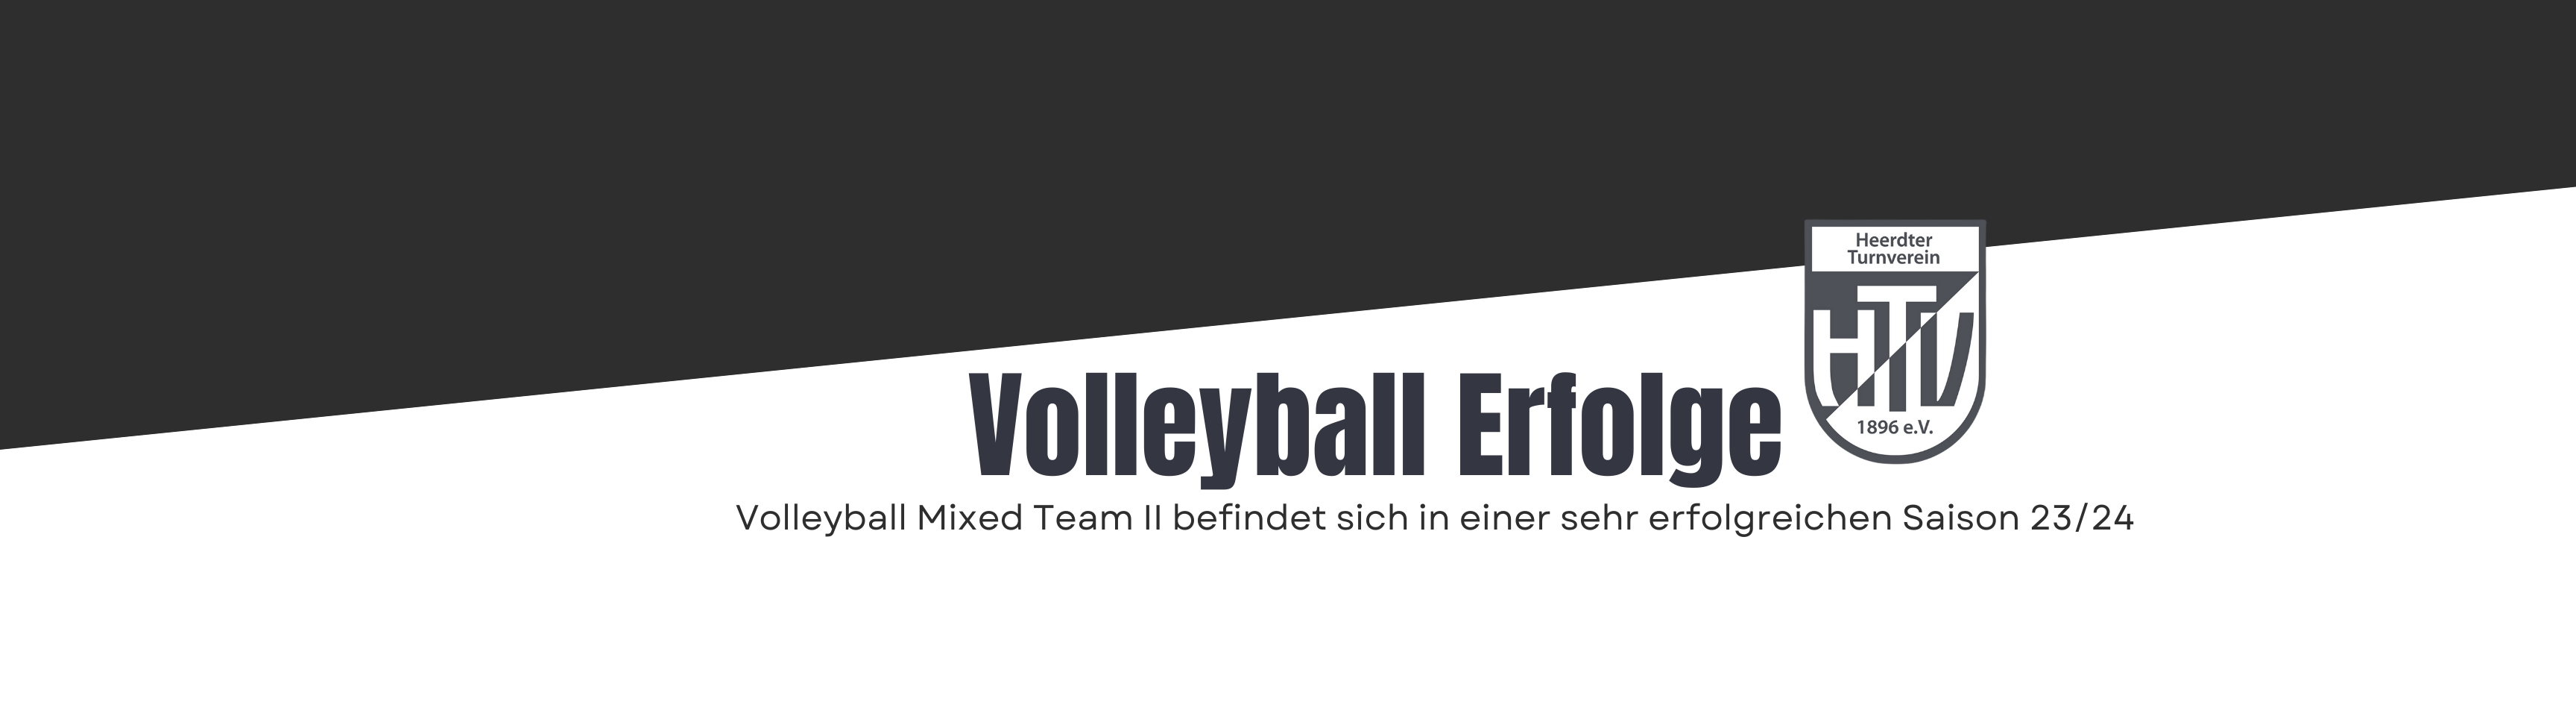 Volleyball Erfolge